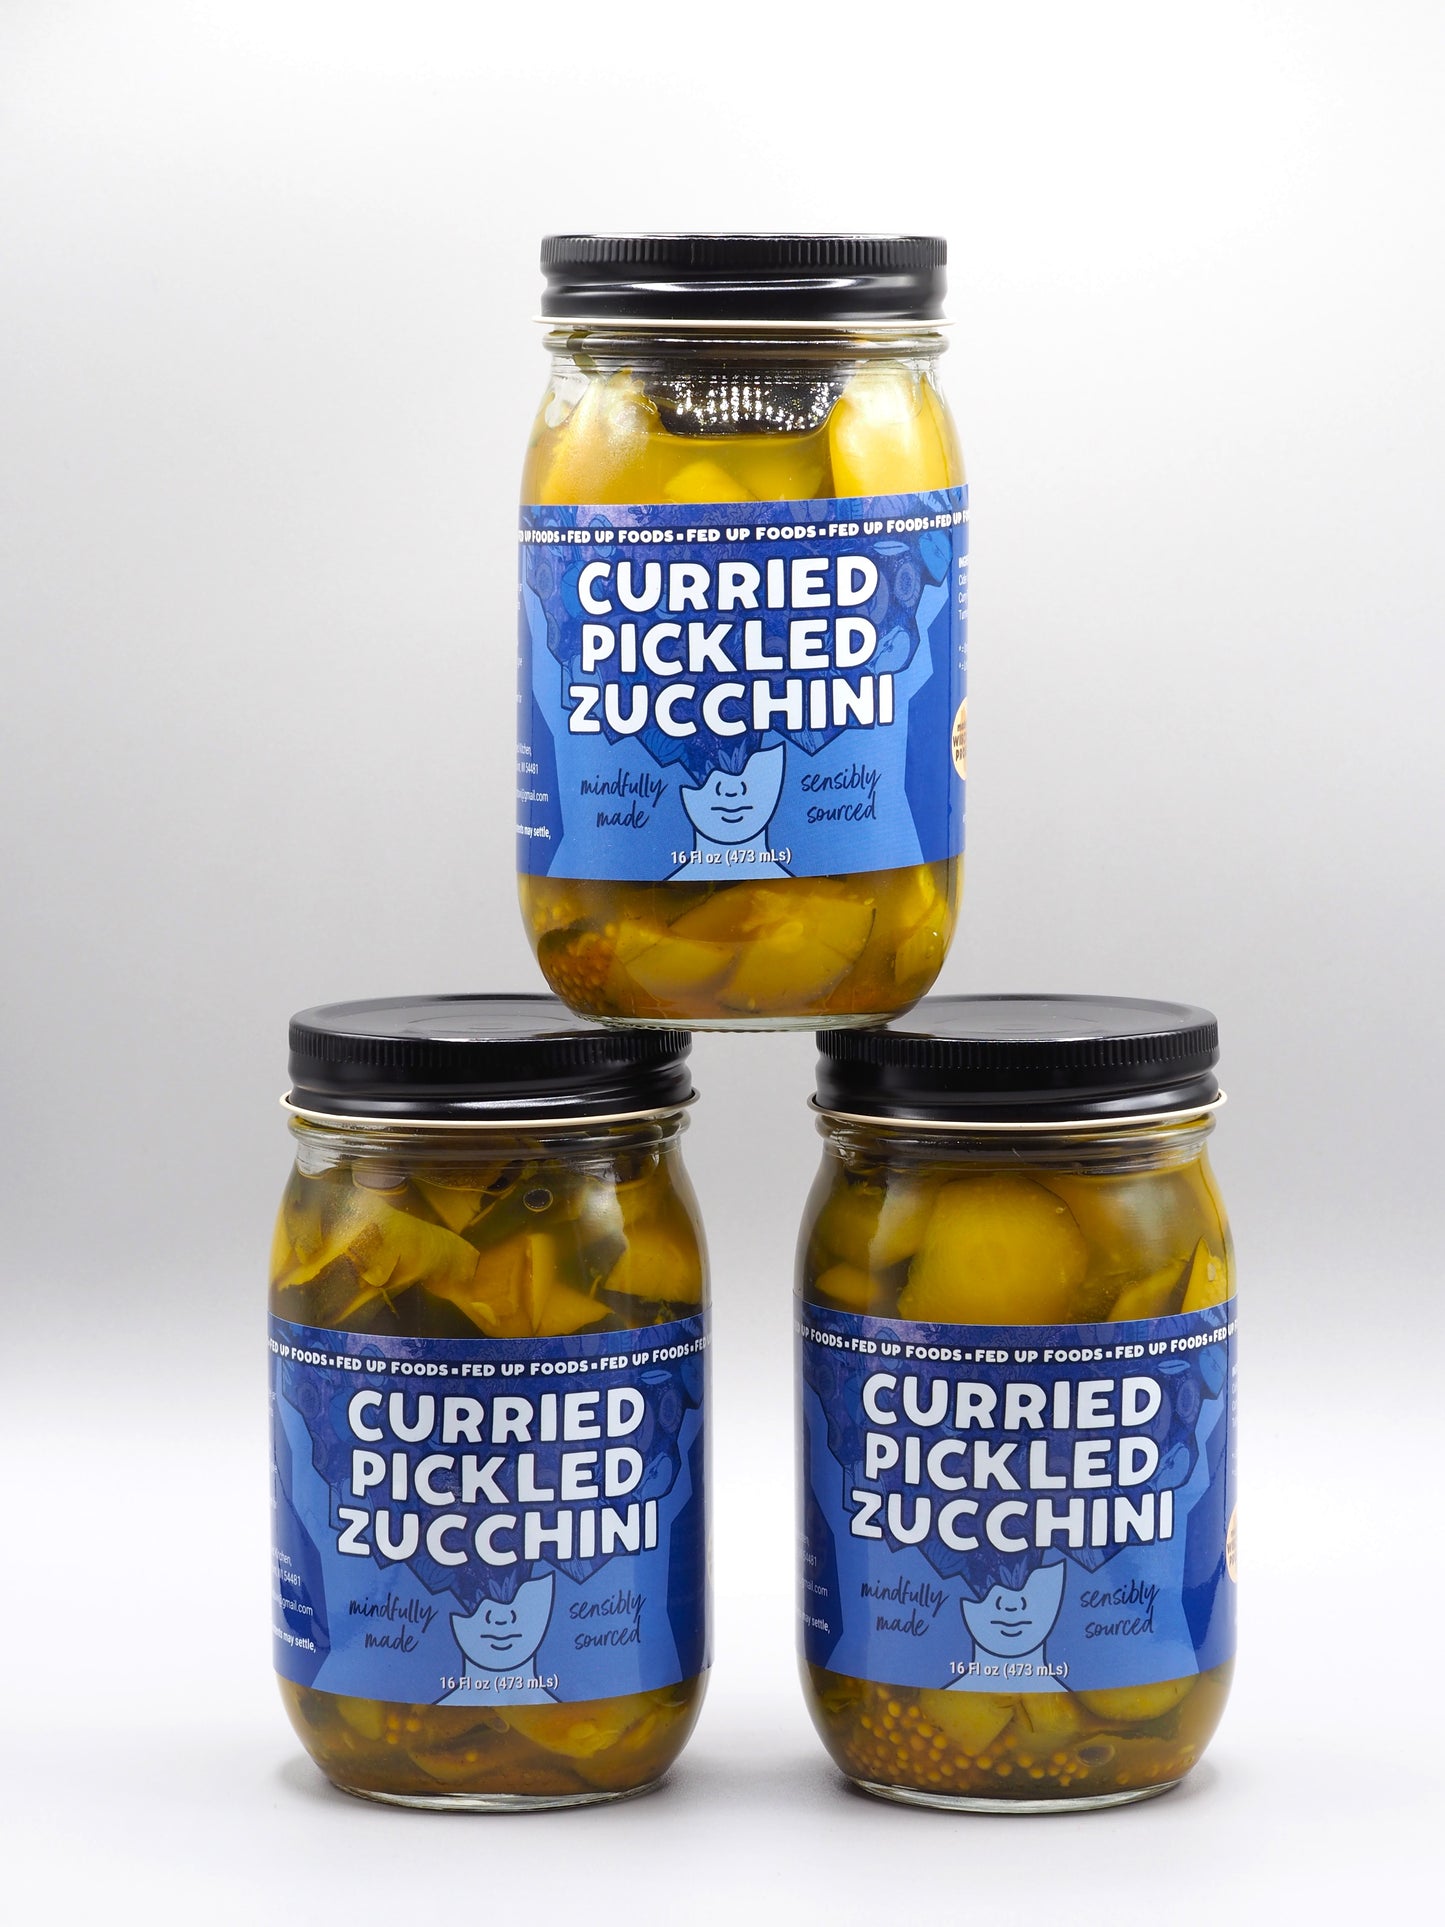 Fed Up Foods Curried Pickled Zucchini 3 pack